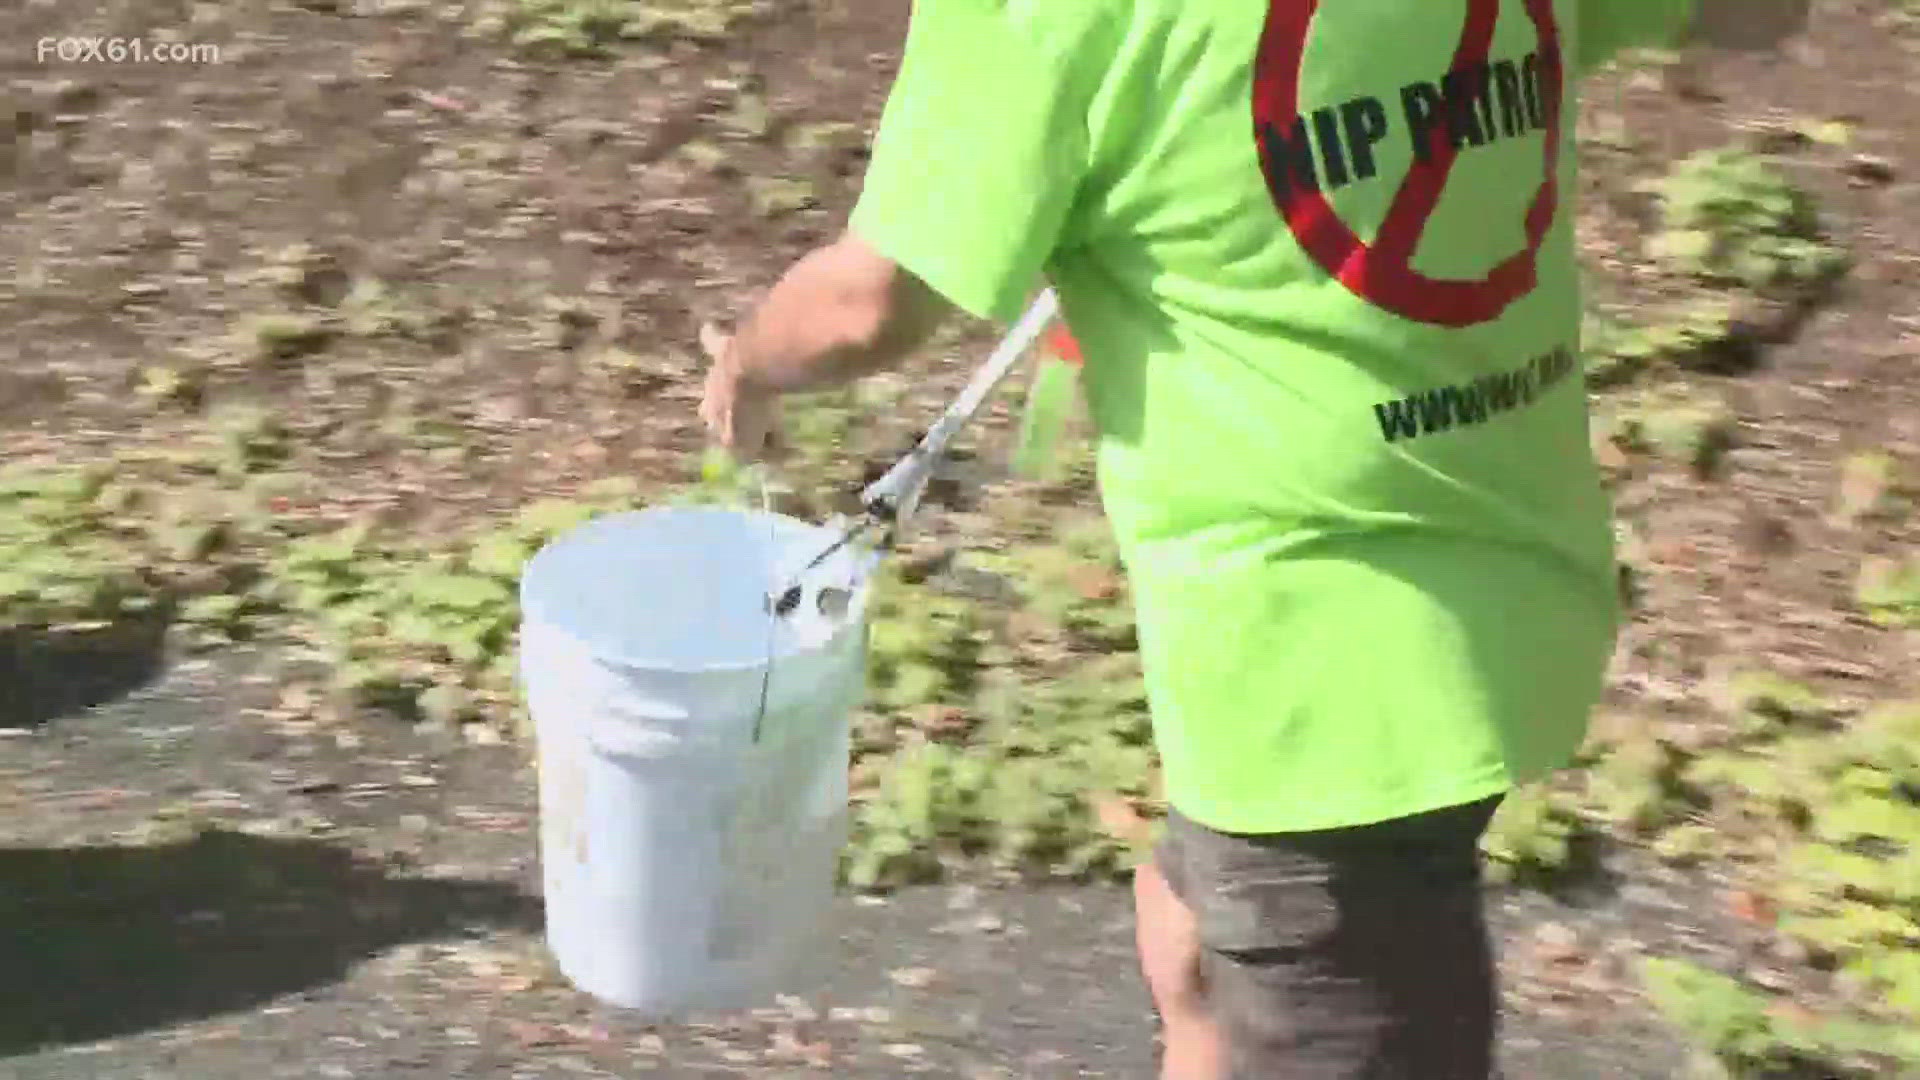 Opportunity Works provides employment opportunities to people of all abilities, including being part of the Nip Patrol, which picks up trash and nip bottles.